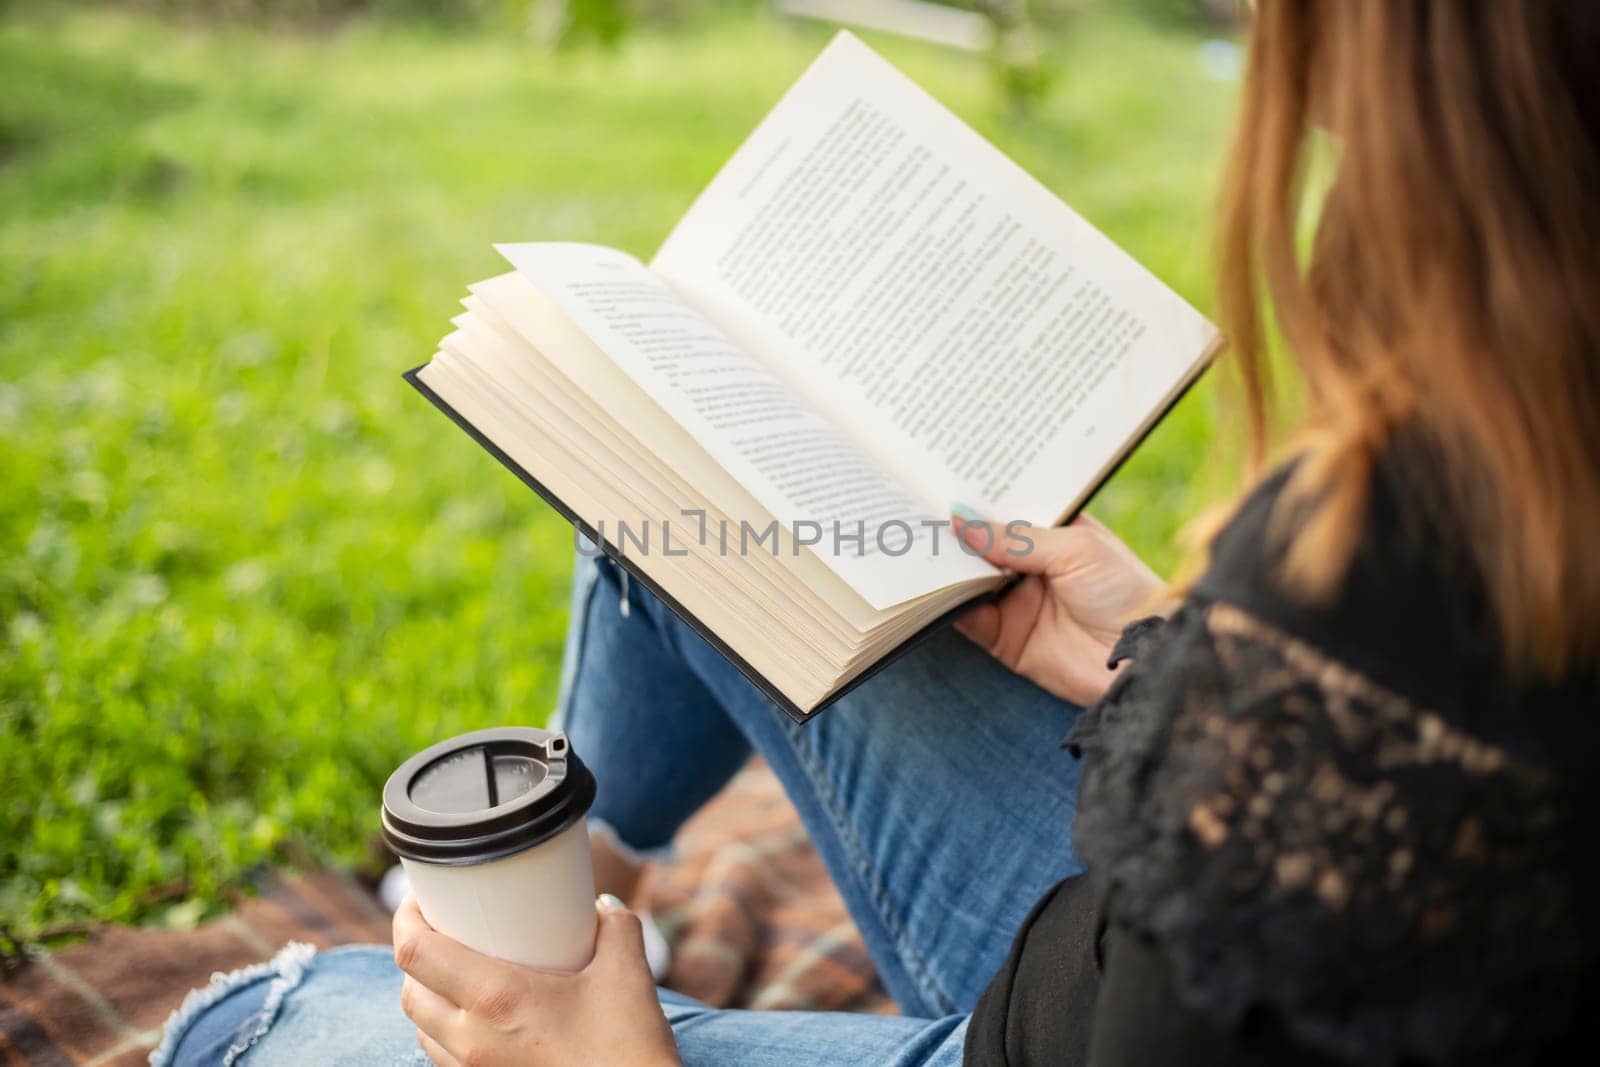 A woman sits near a tree in the park and holds a book and a cup with a hot drink by andreyz